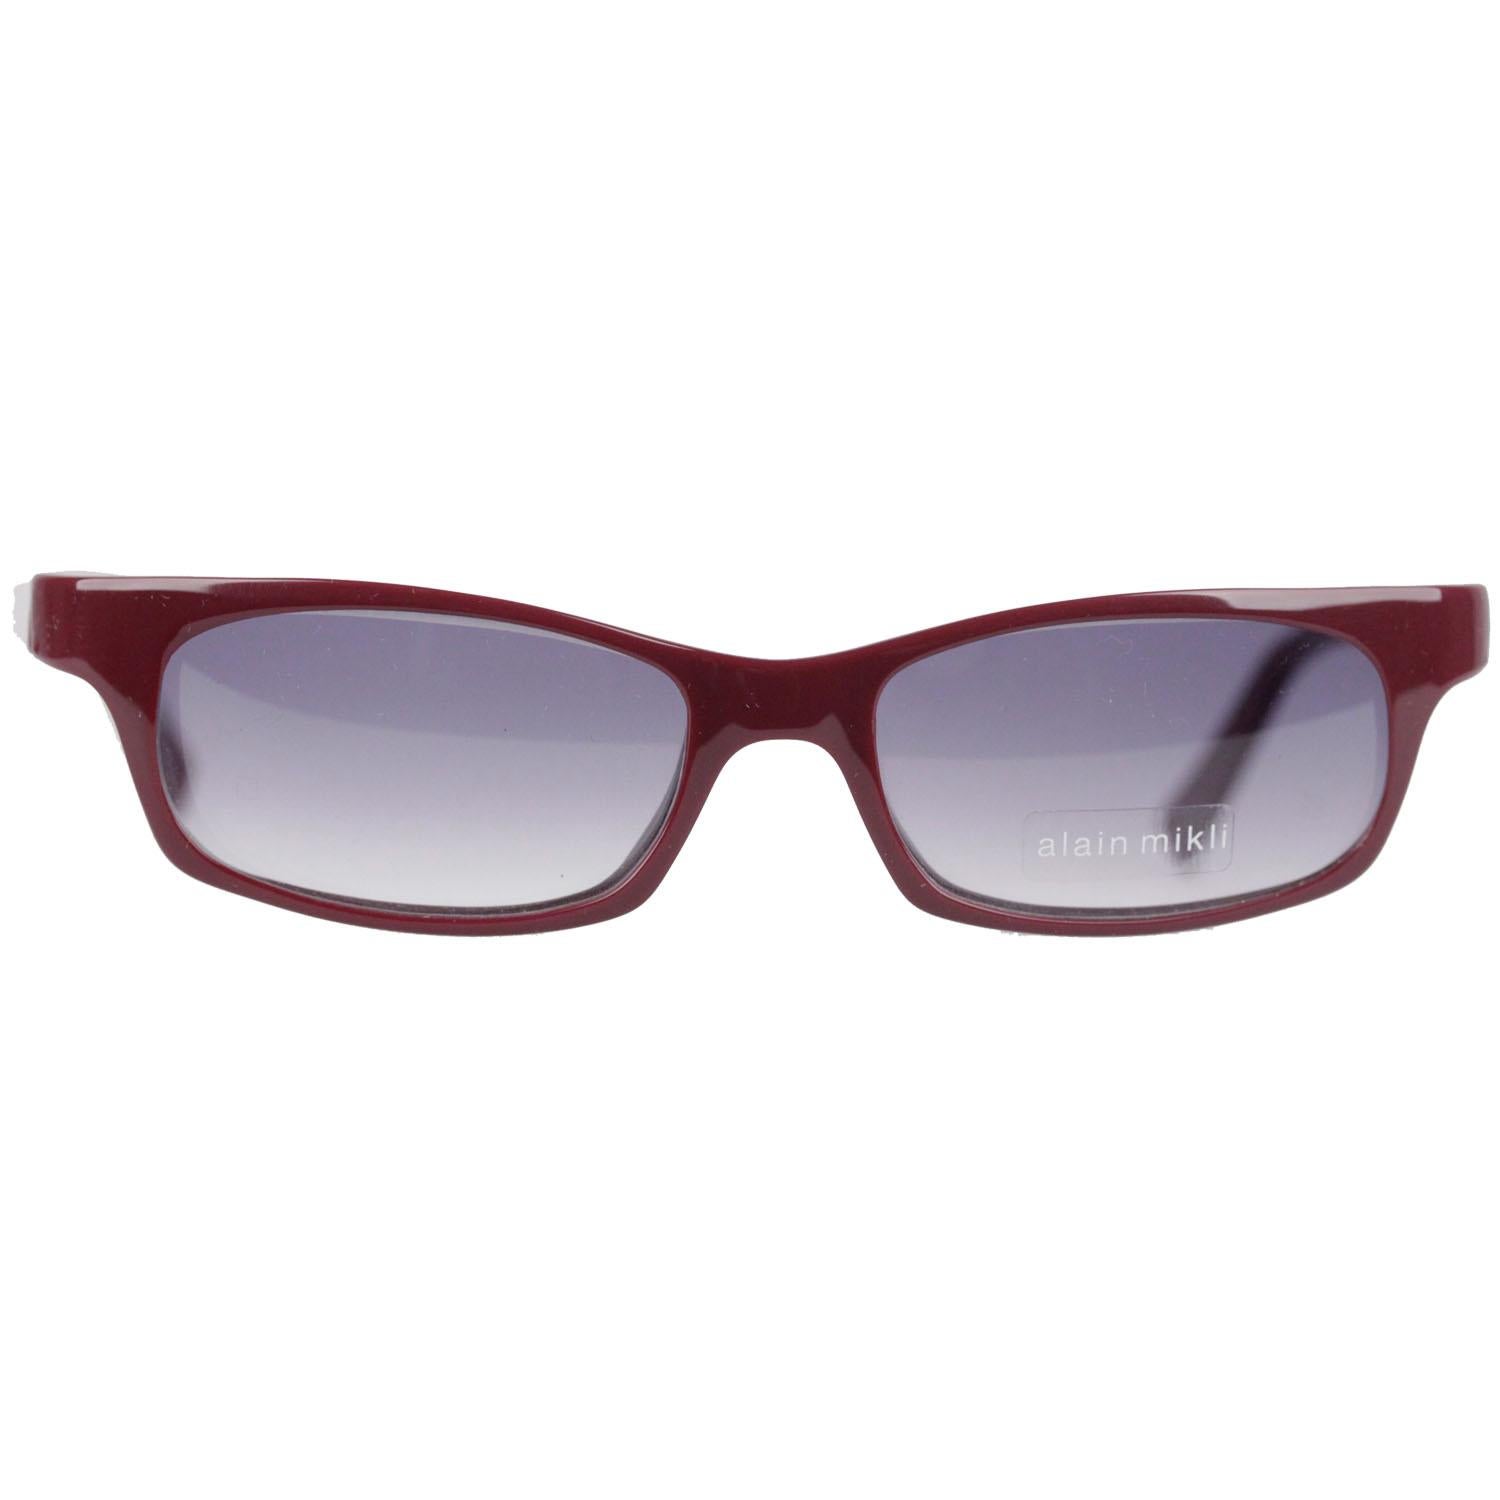 MATERIAL: Acetate

COLOR: Burgundy

MODEL: A0701

GENDER: Adult Unisex

SIZE: Medium

COUNTRY OF MANUFACTURE: France

Condition
CONDITION DETAILS:

Never worn or used - Will come with a GENERIC Case

Measurements
MEASUREMENTS:

TEMPLE MAX. LENGTH: